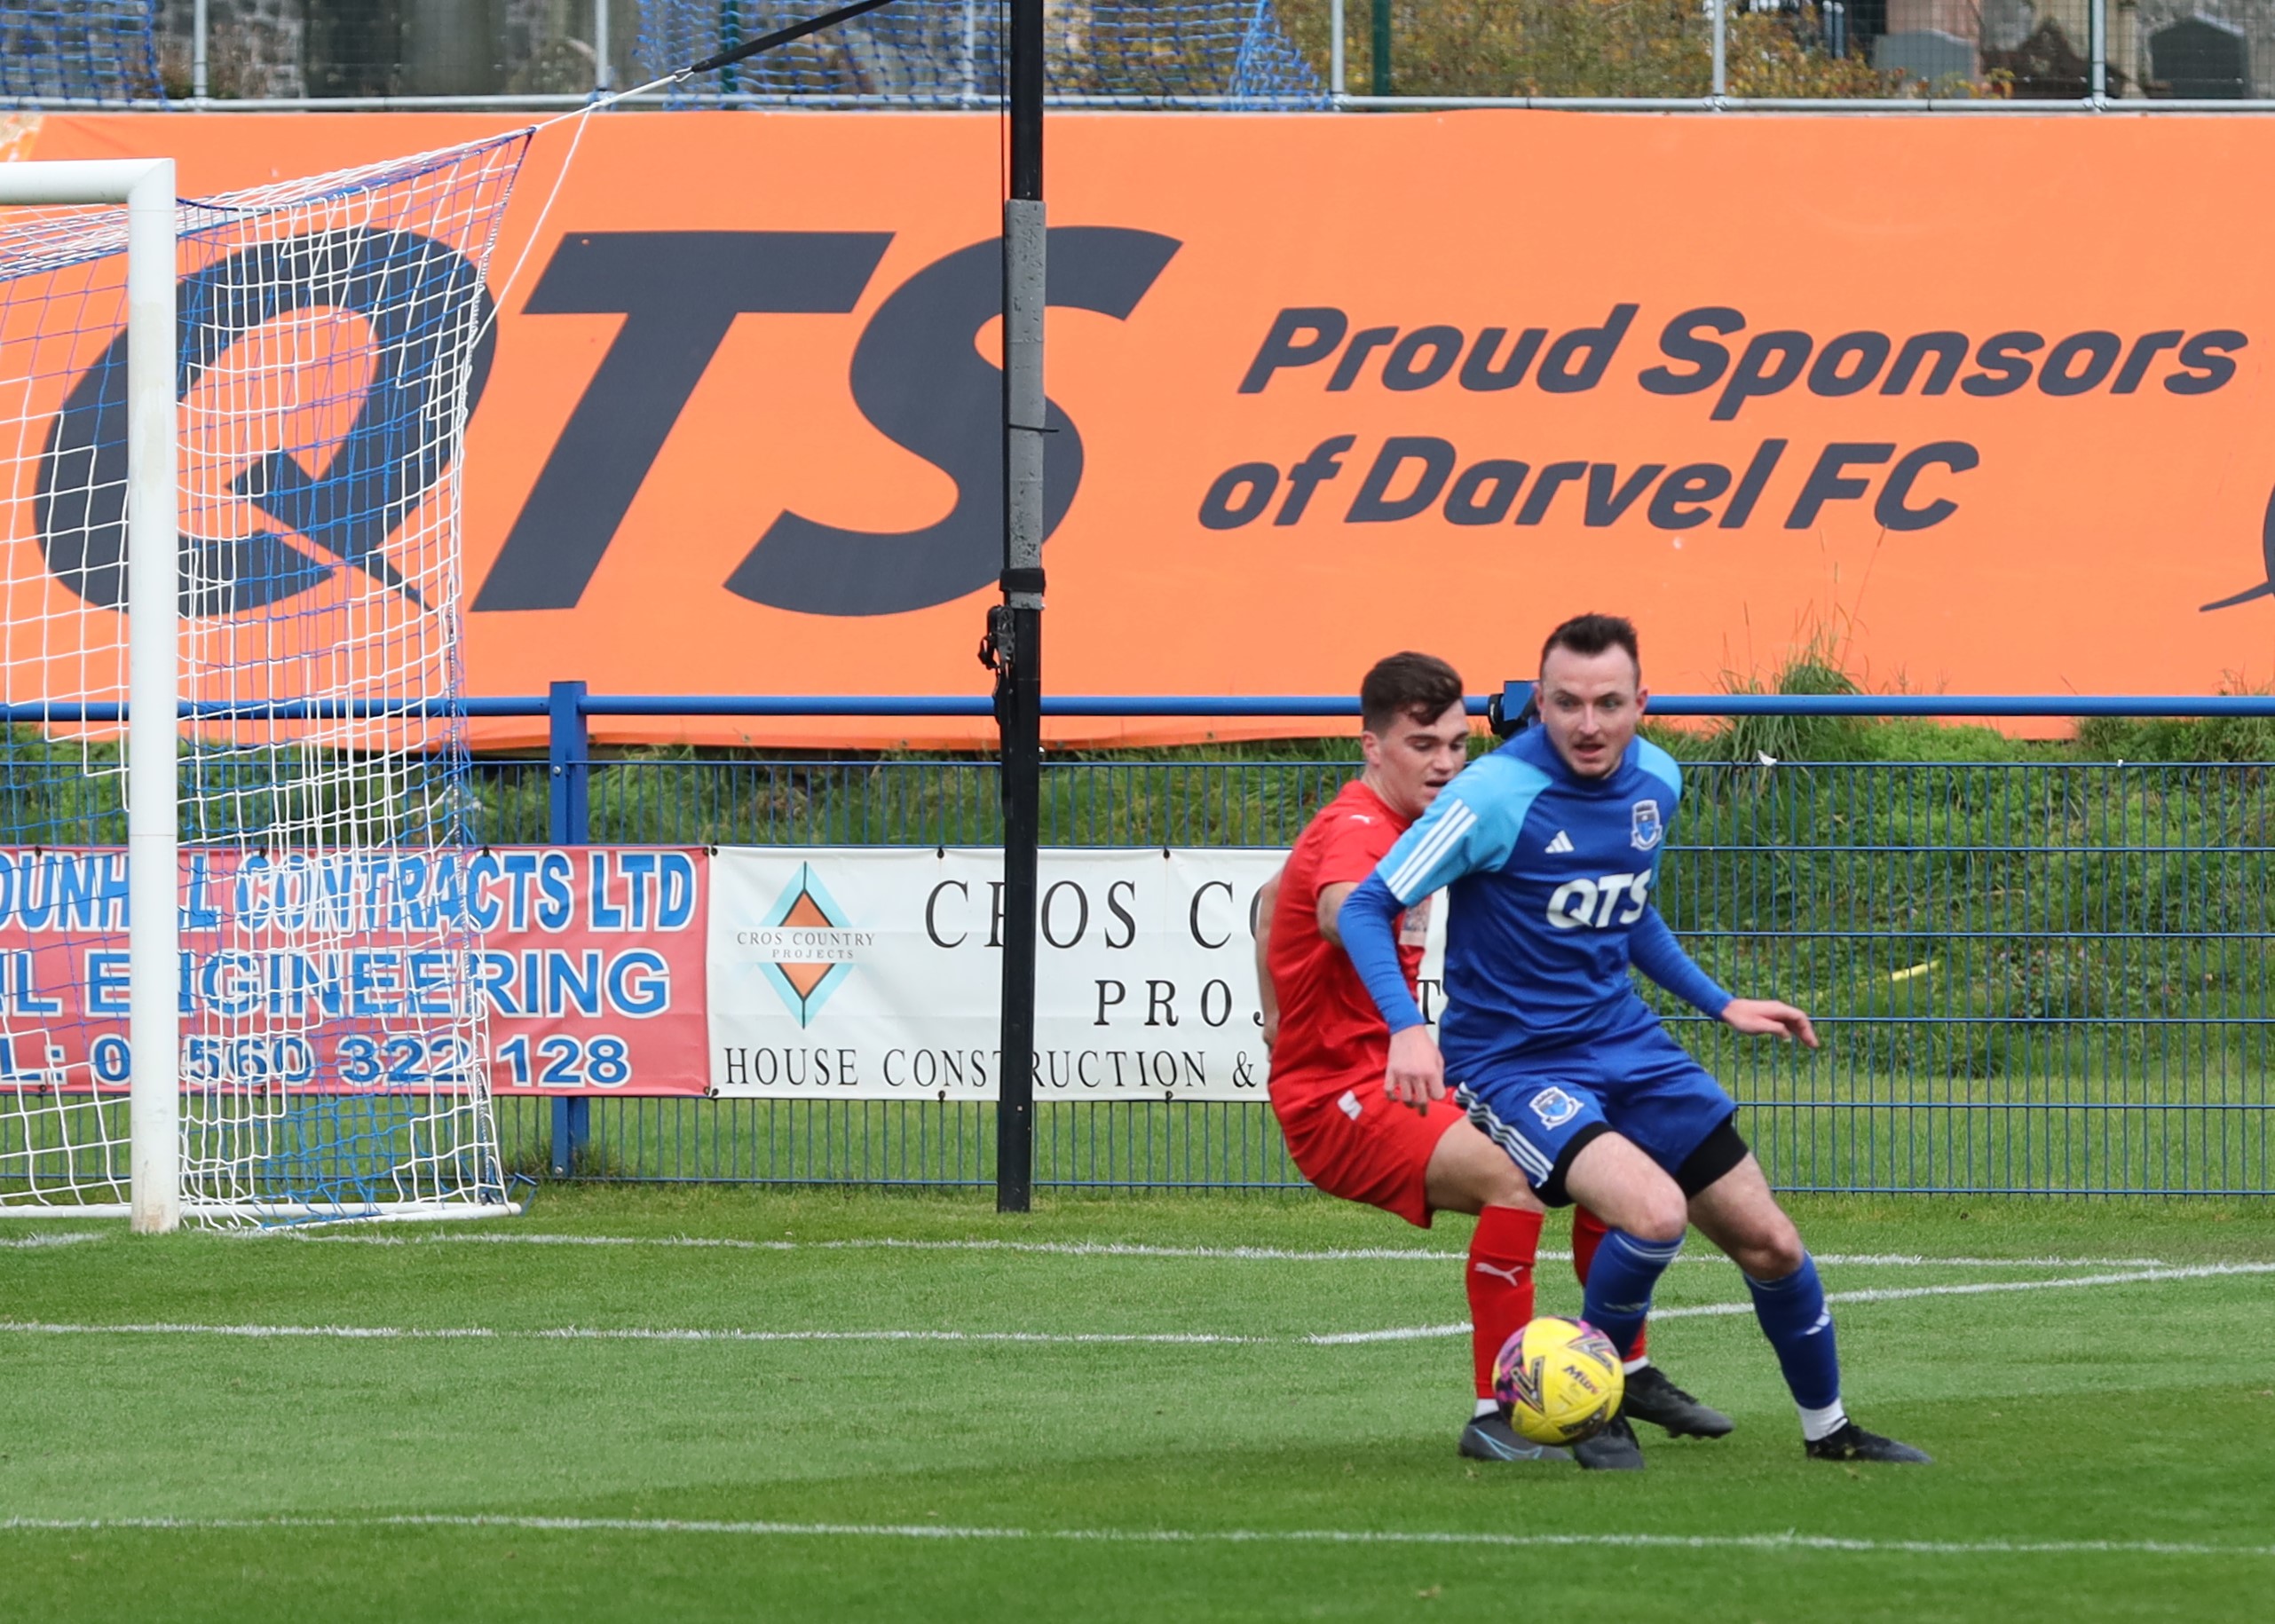 Darvel FC teams up with QTS for sponsorship extension